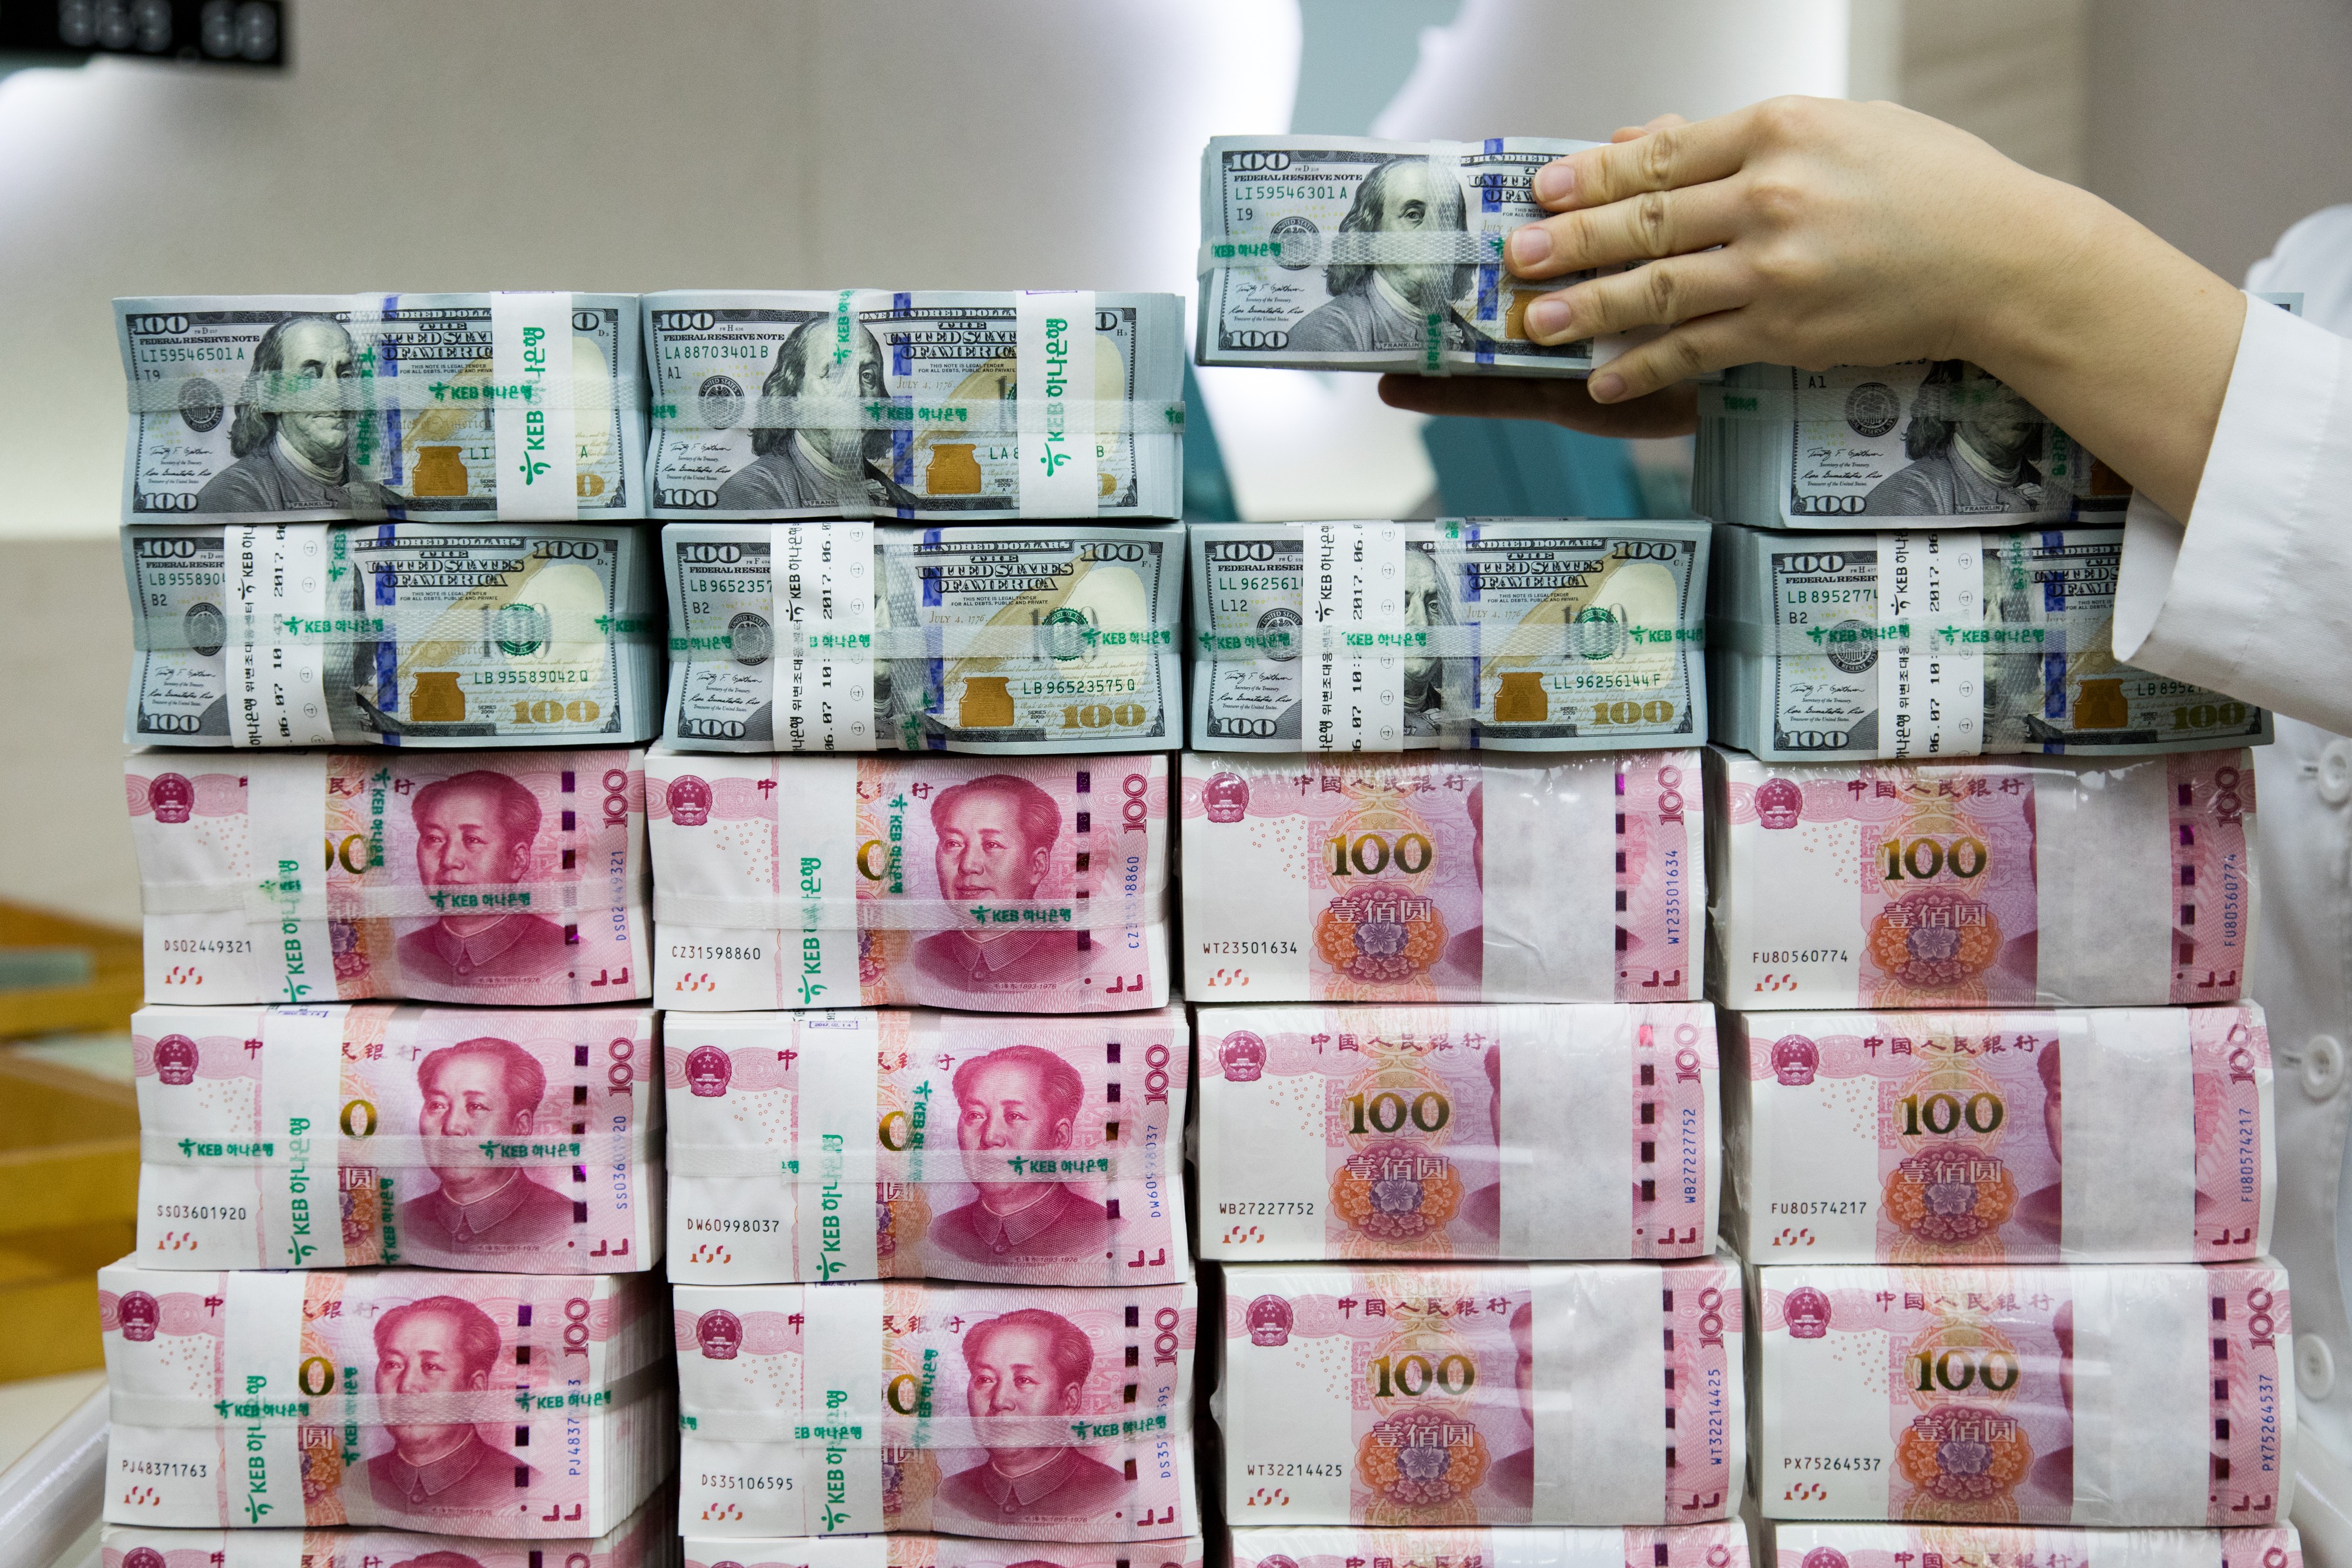 It has been 10 years since China embarked on the internationalisation of the renminbi, which was seen as an attempt to challenge the US dollar’s supremacy. Photo: Bloomberg